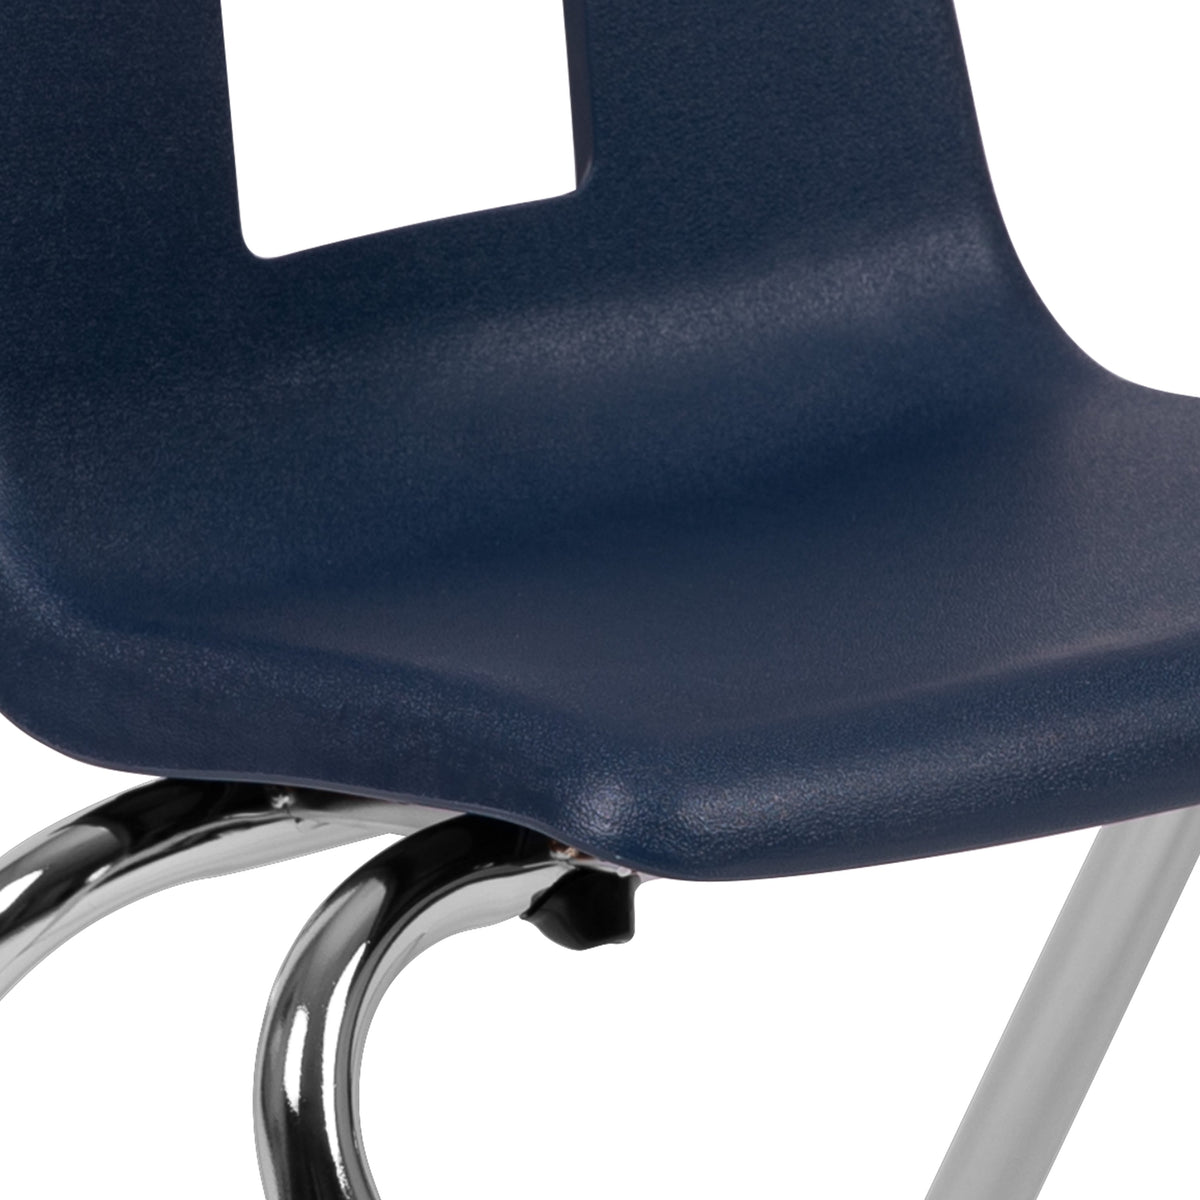 Navy |#| Navy Student Stack Chair 12inchH Seat - School Classroom Chair - Daycare Chair